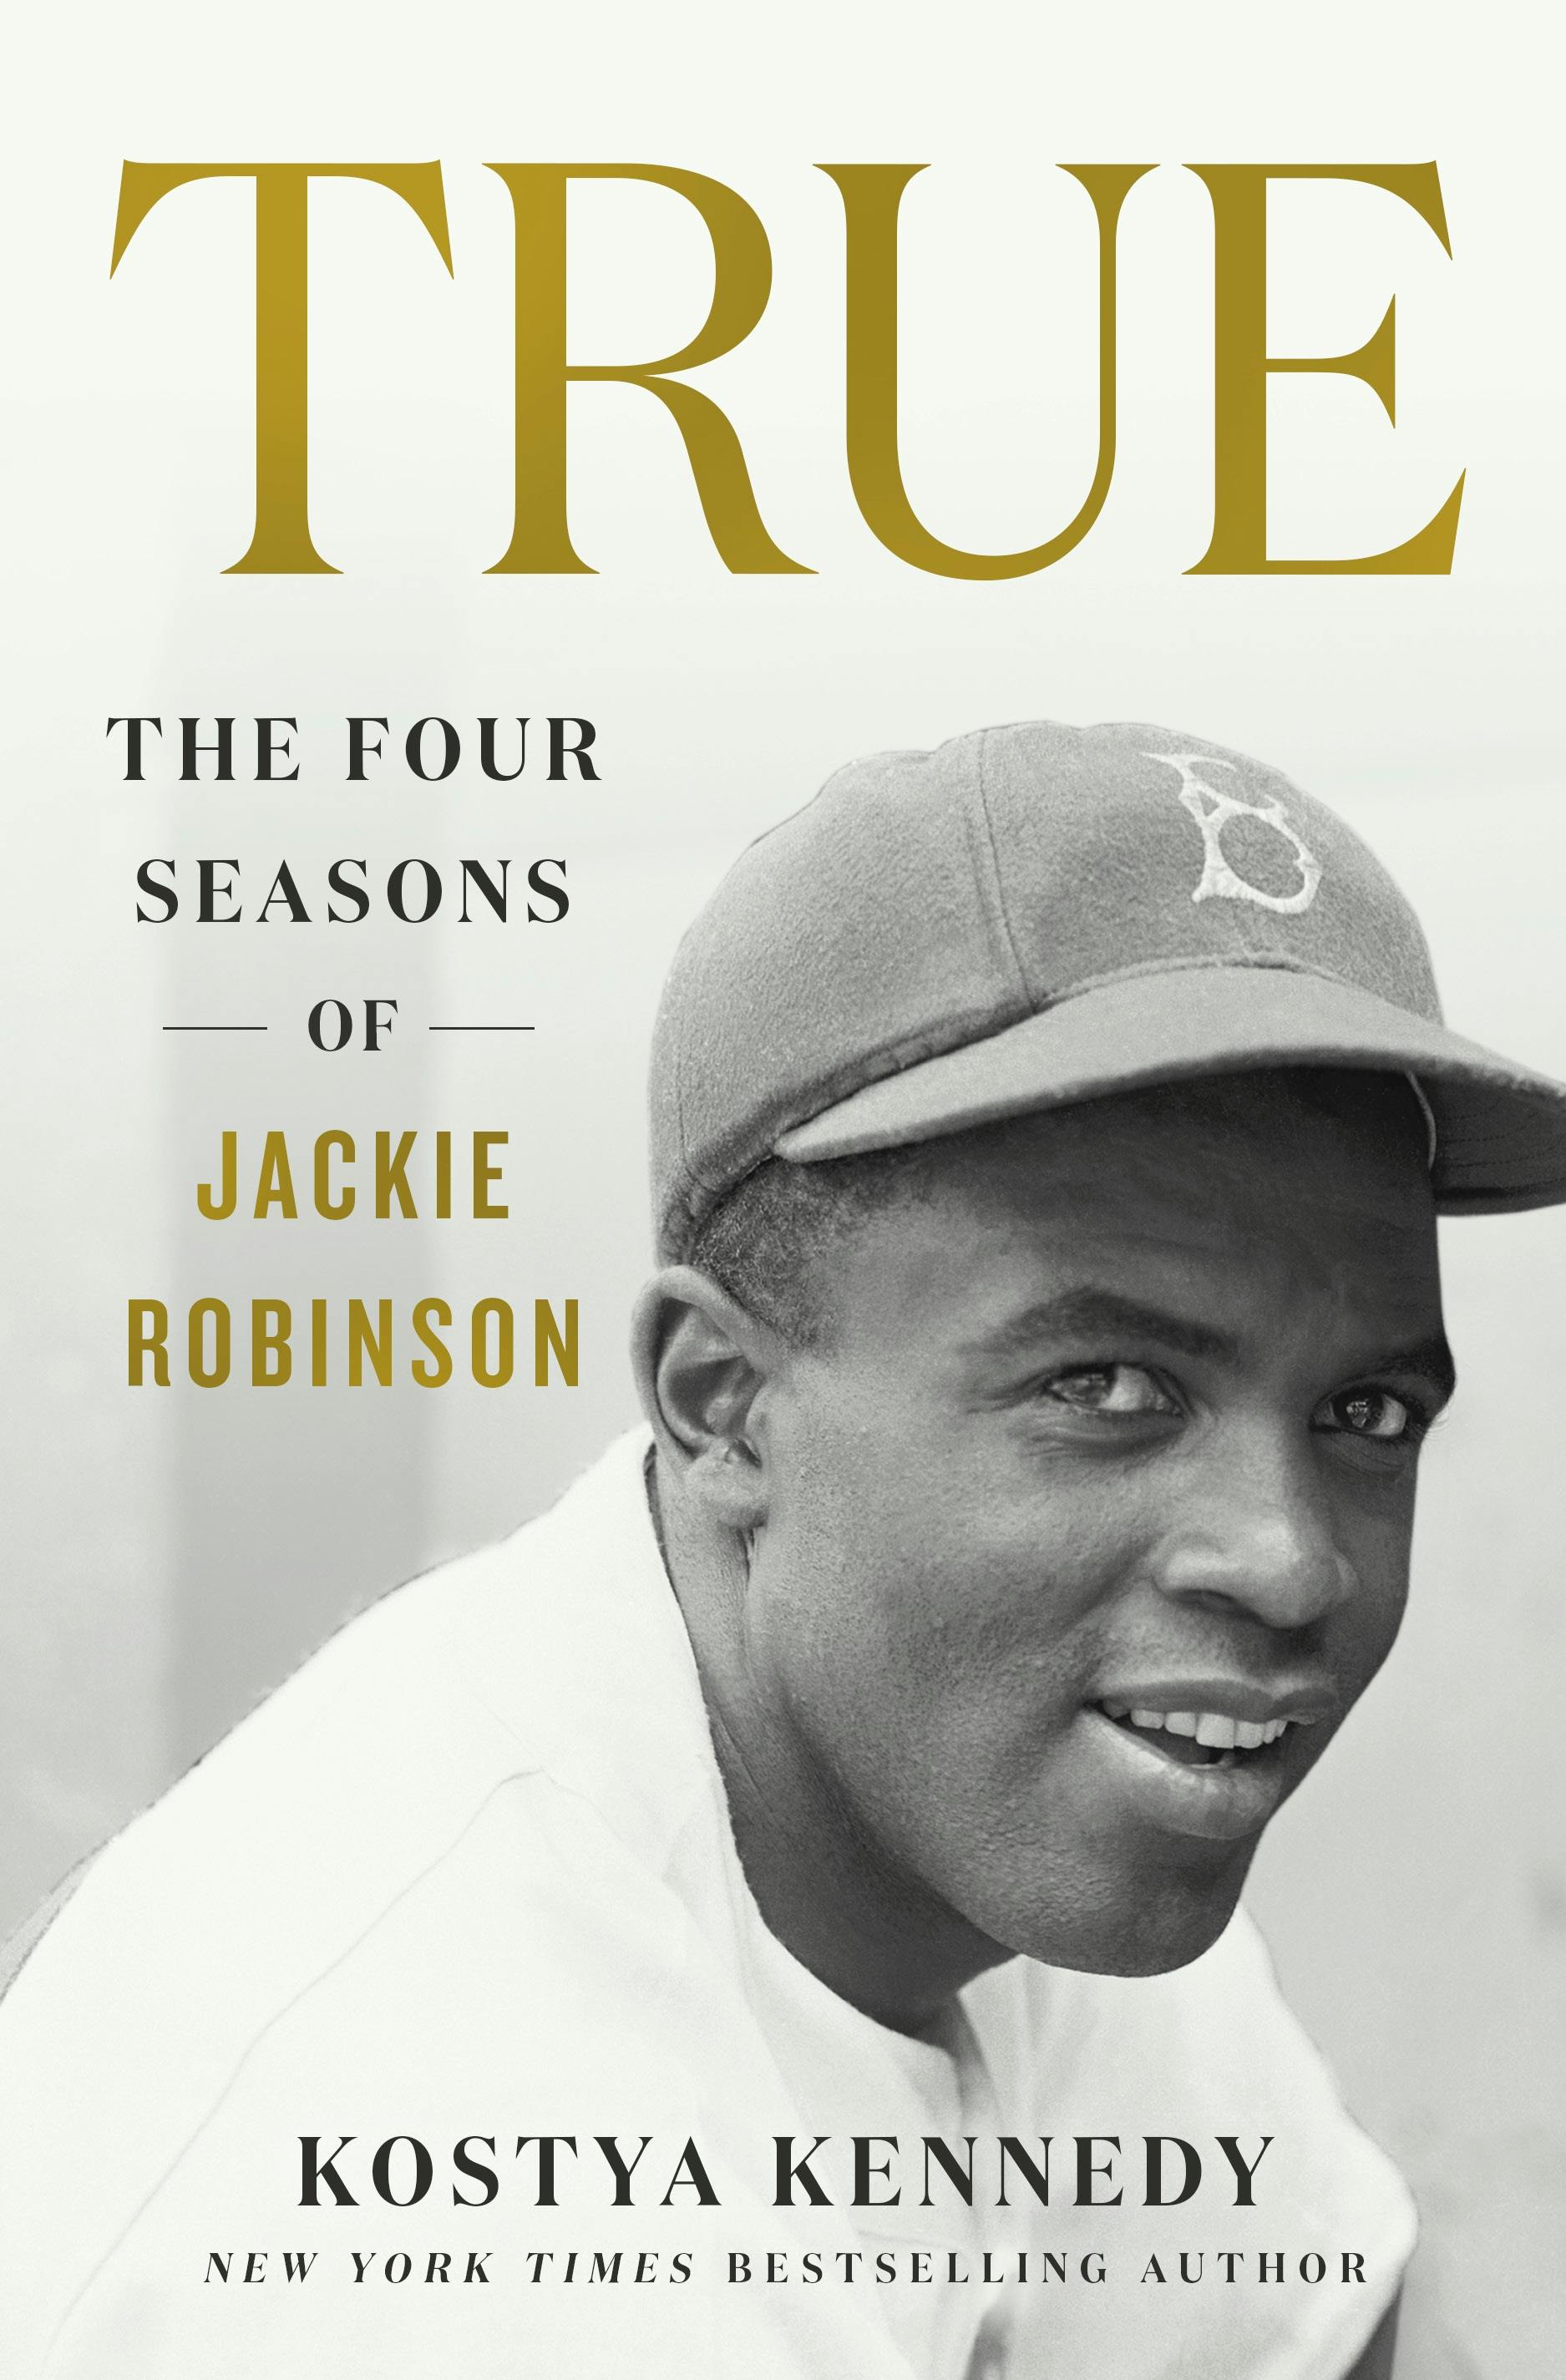 Jackie Robinson: 5 interesting facts about his MLB debut